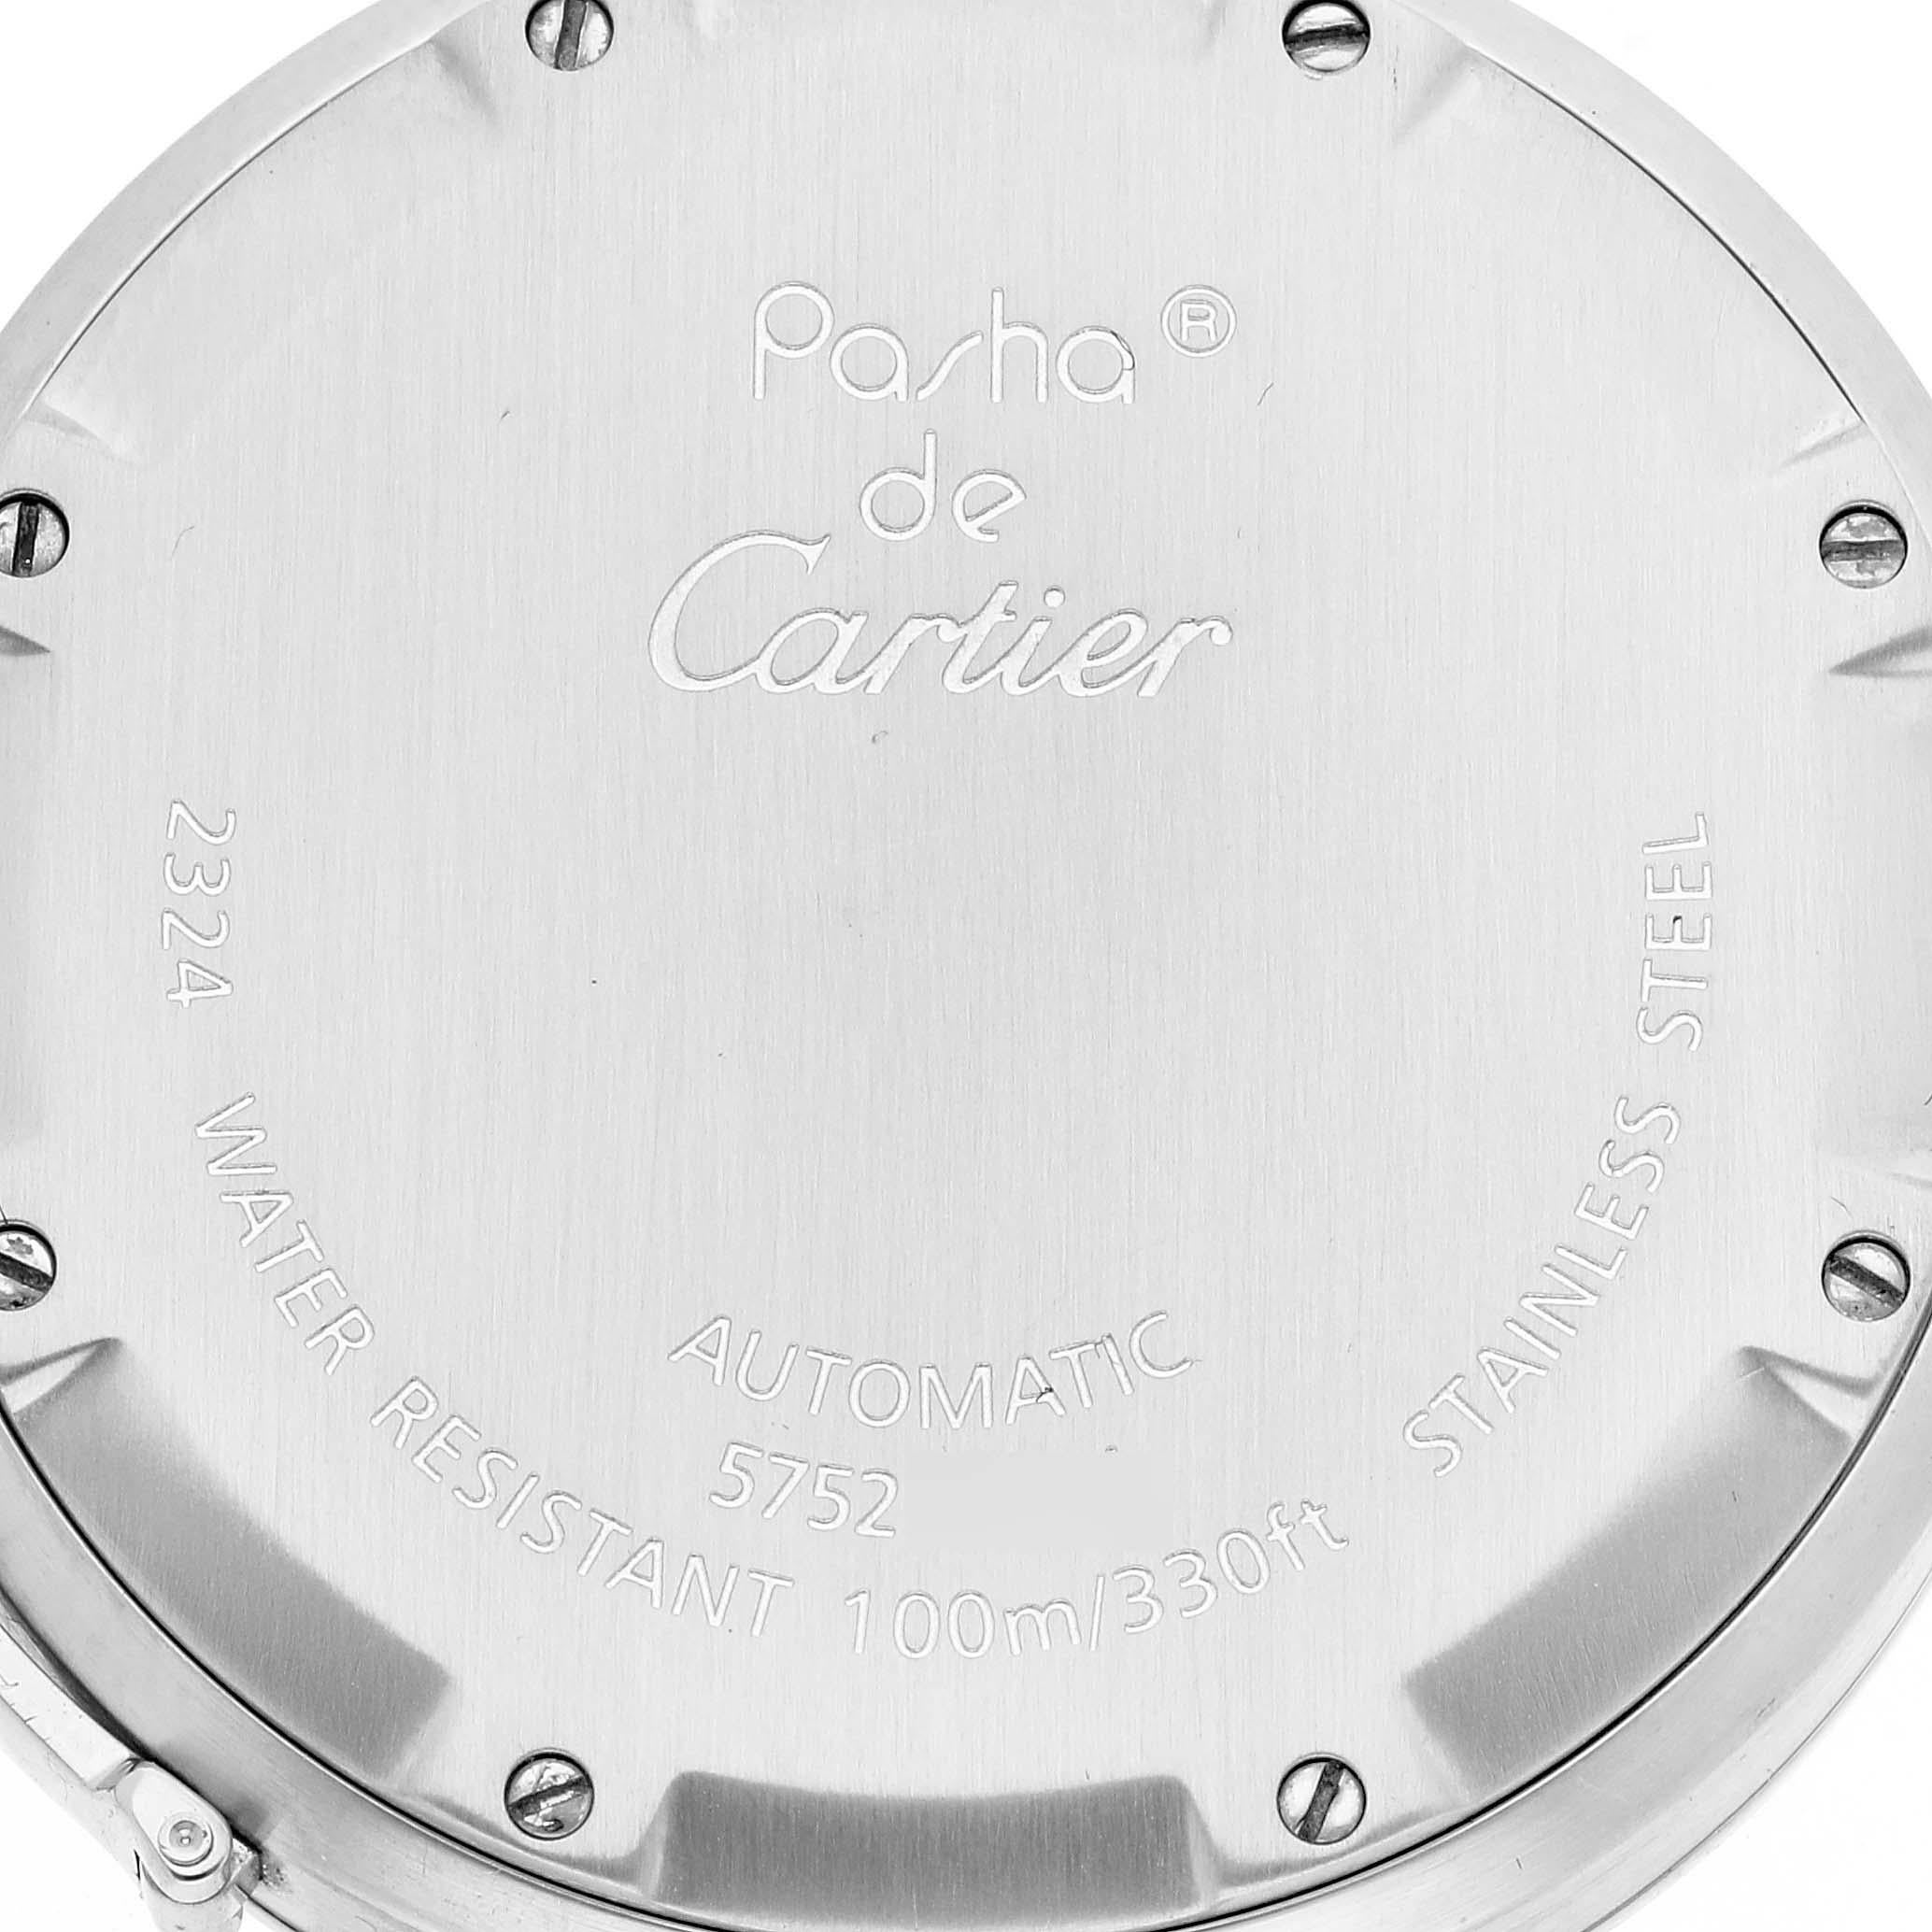 Cartier Pasha C Flower Dial Limited Edition Steel Ladies Watch W3109699 2